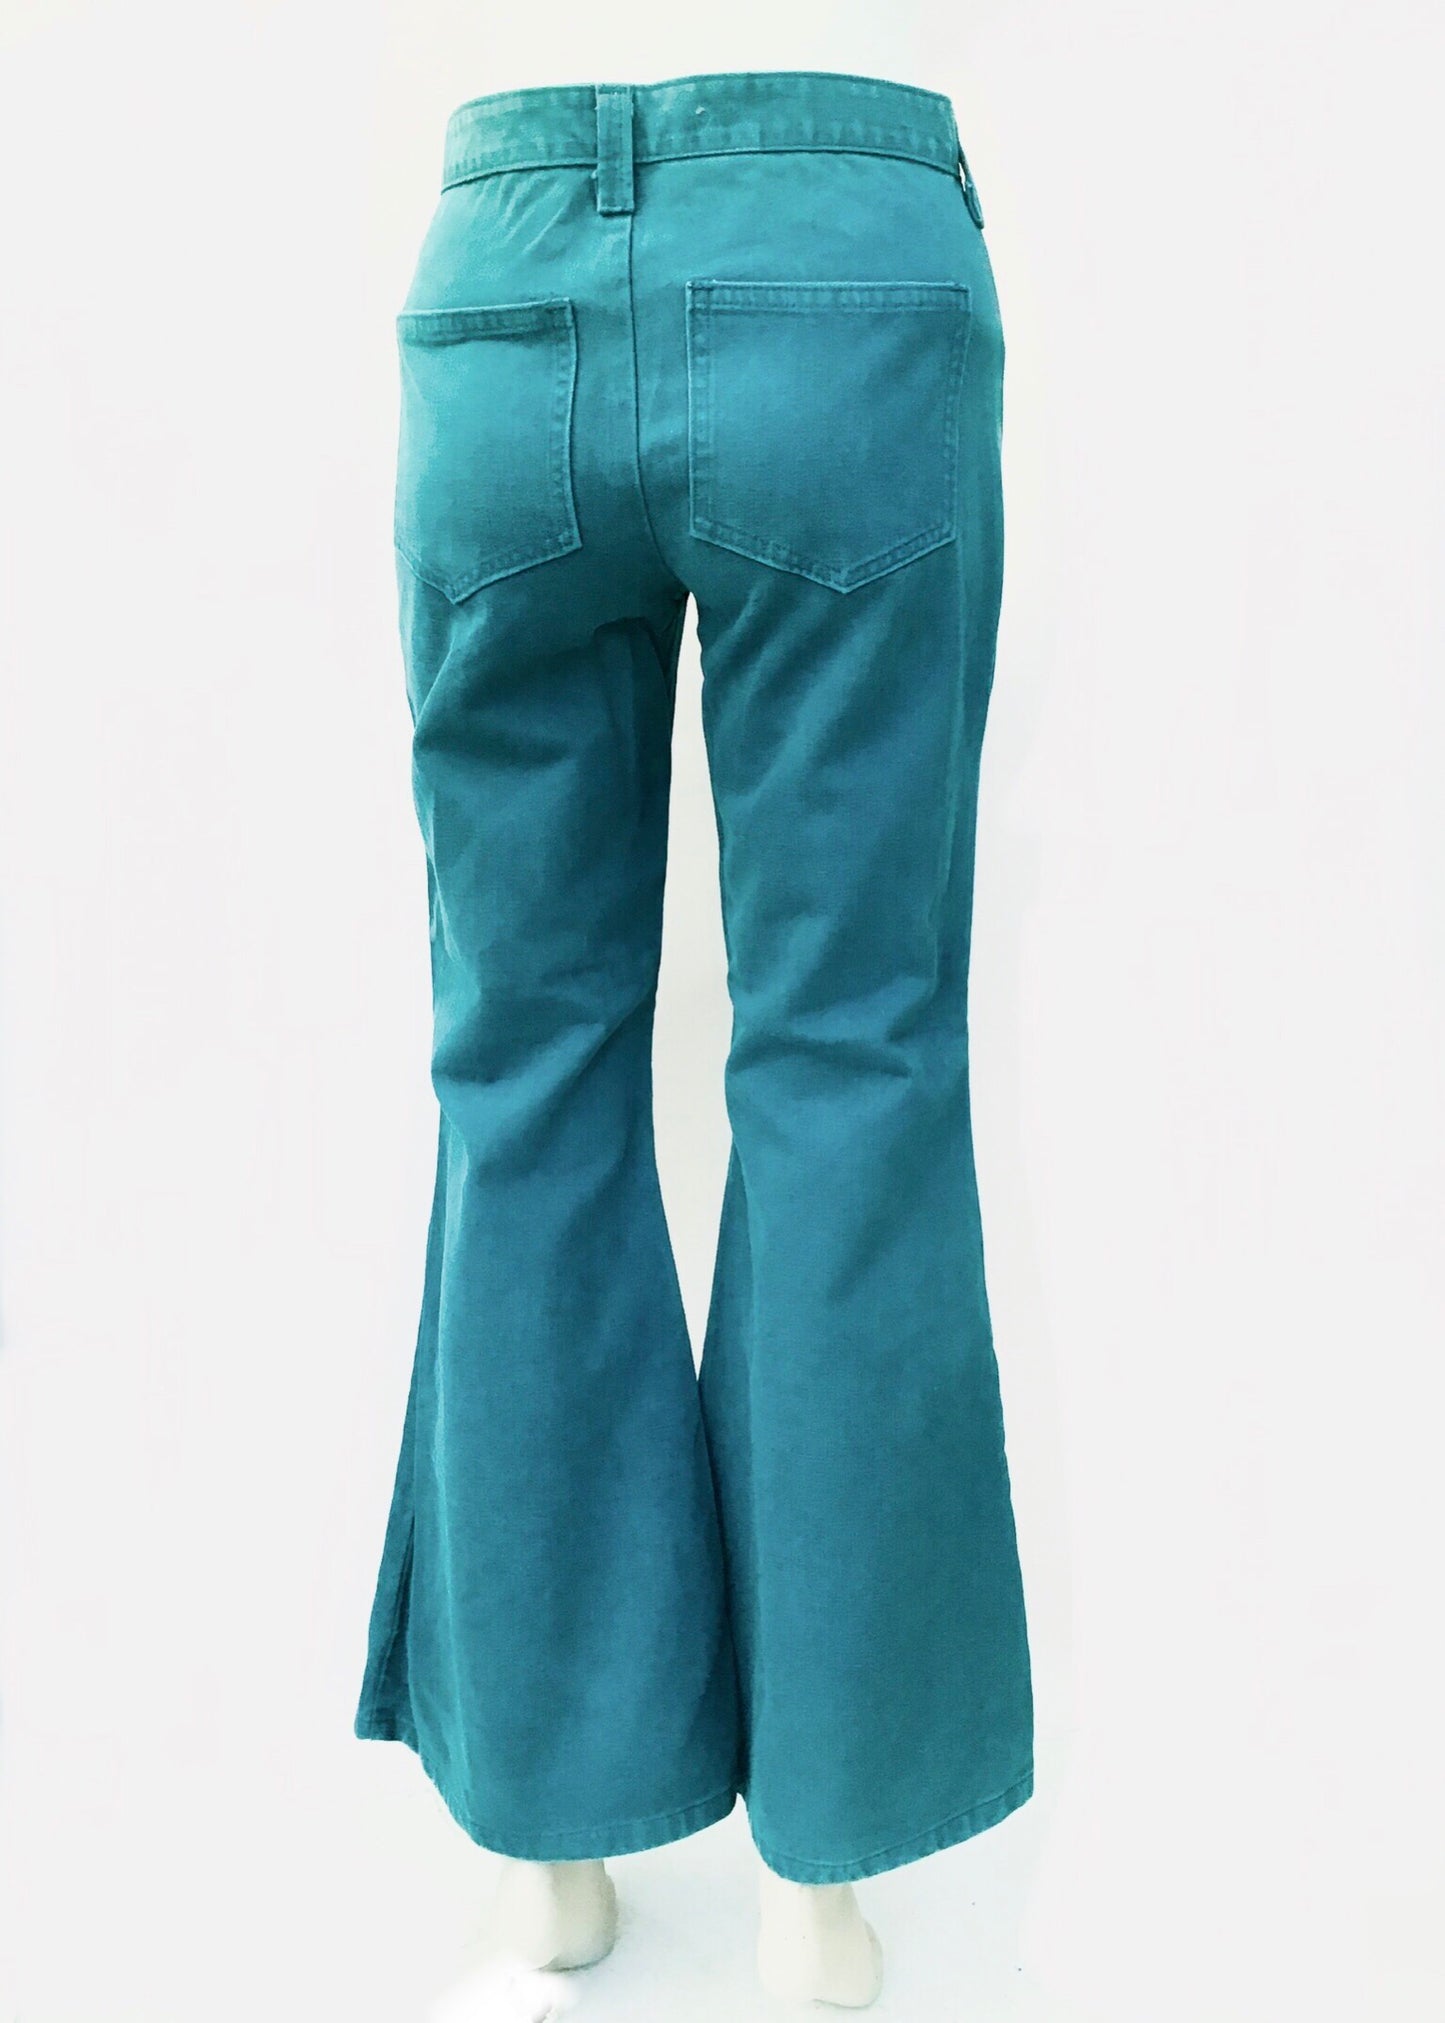 1970s Vintage Turquoise Bell Bottom Flared Jeans • HIgh Waist 28”W